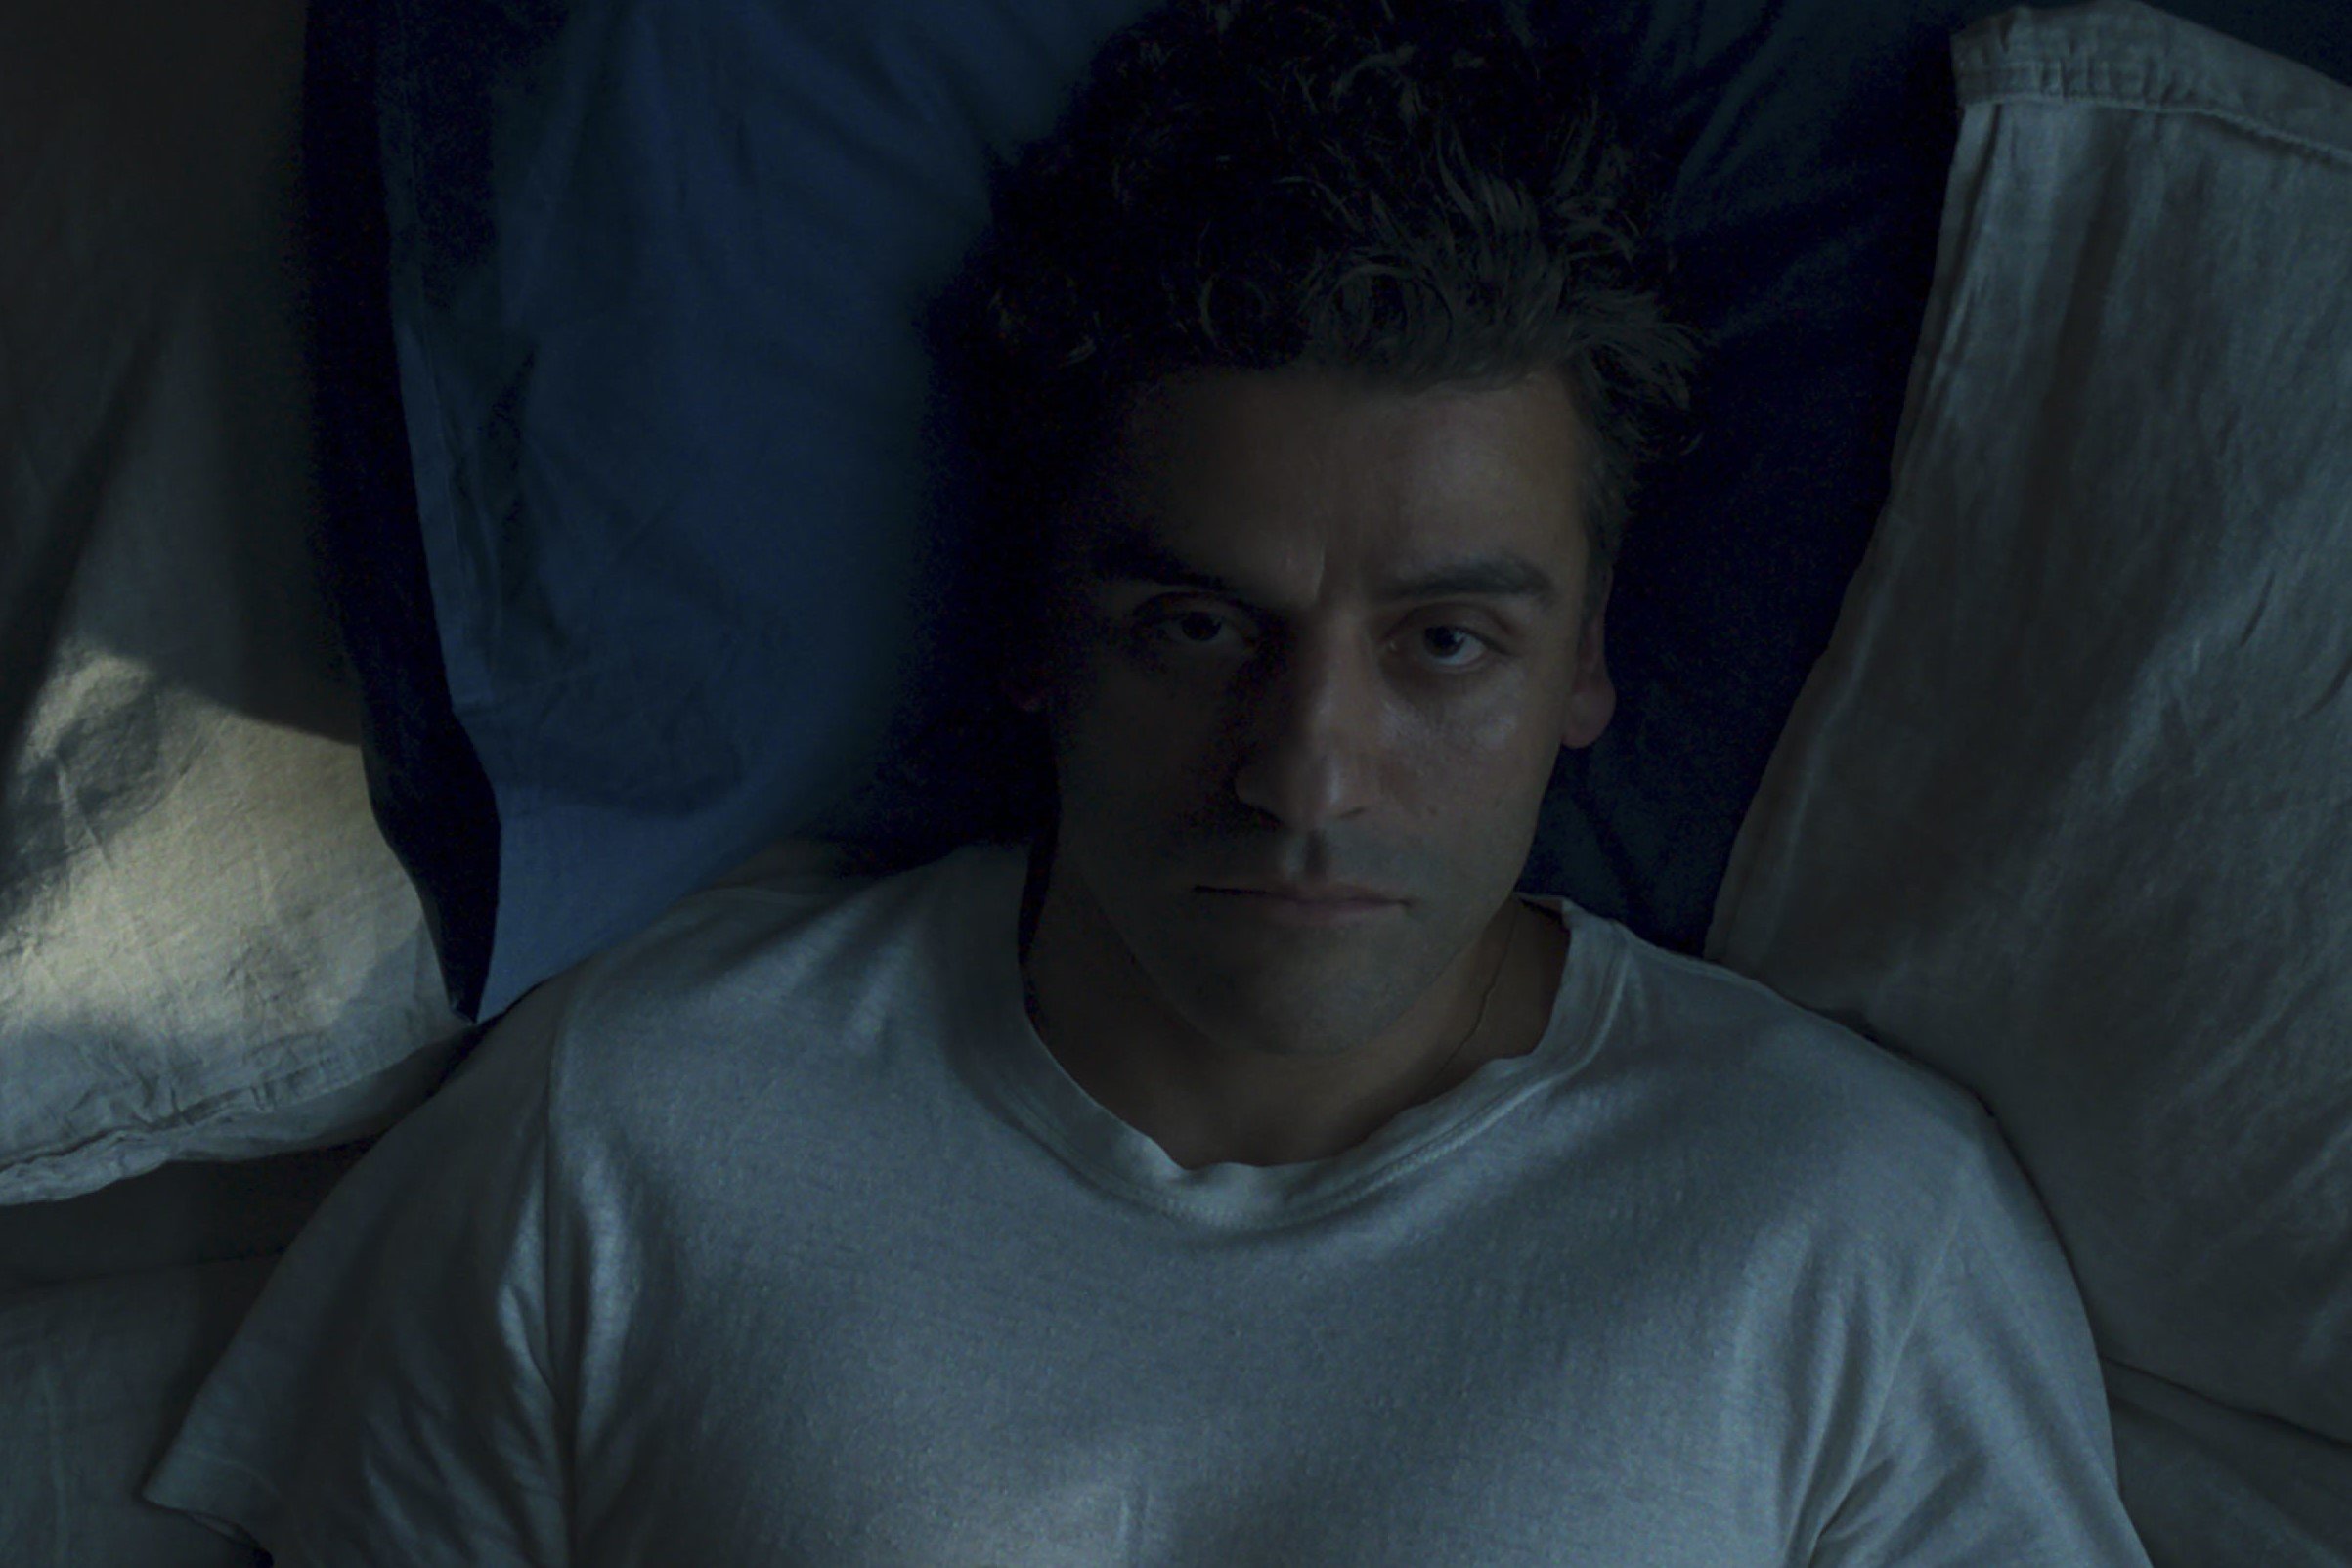 Oscar Isaac, whose brother helped him play multiple characters in 'Moon Knight,' appears in a scene as Steven Grant. Steven lays in beds and wears a white shirt.